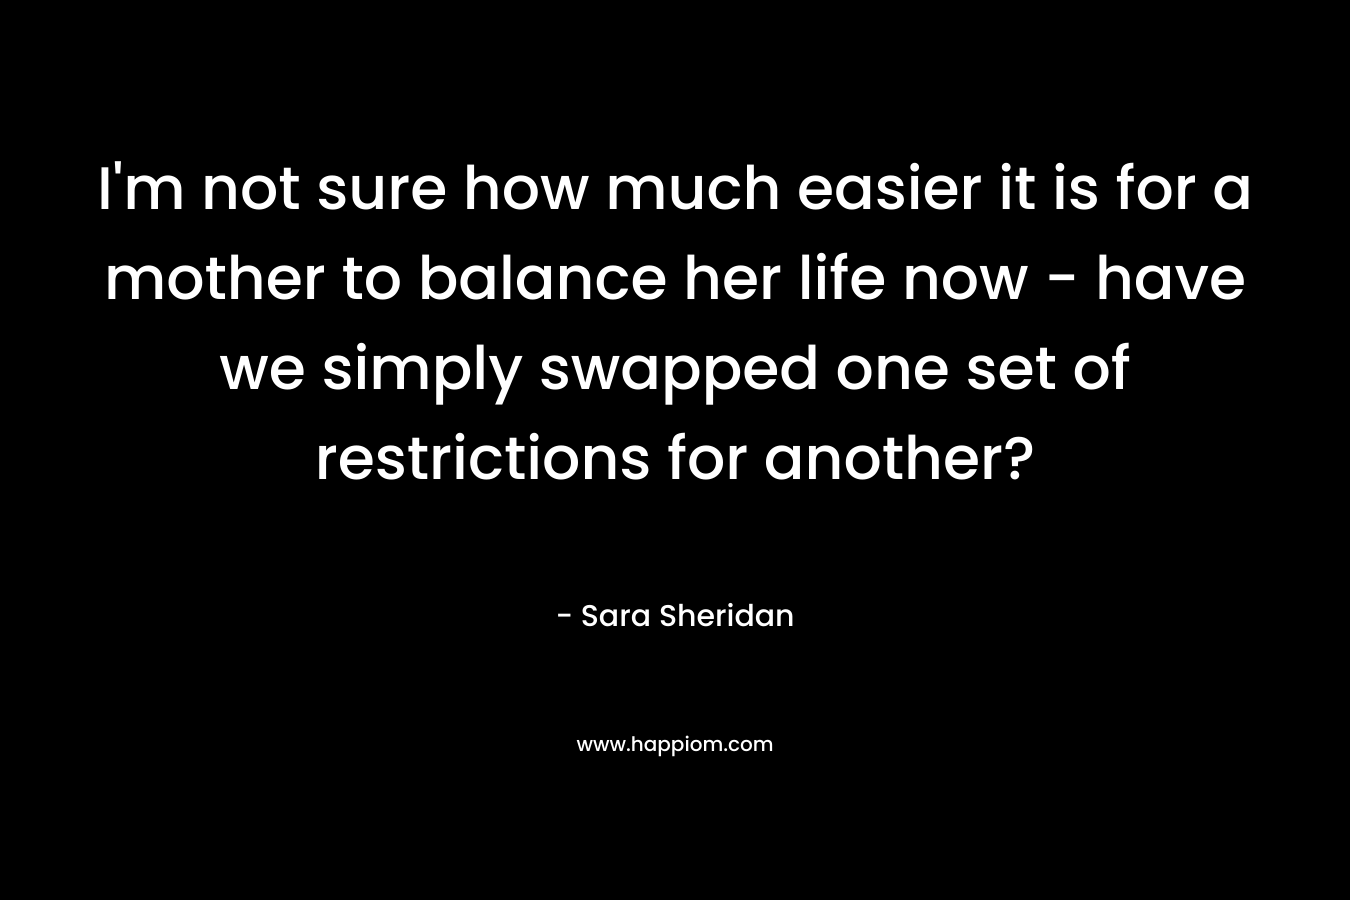 I'm not sure how much easier it is for a mother to balance her life now - have we simply swapped one set of restrictions for another?